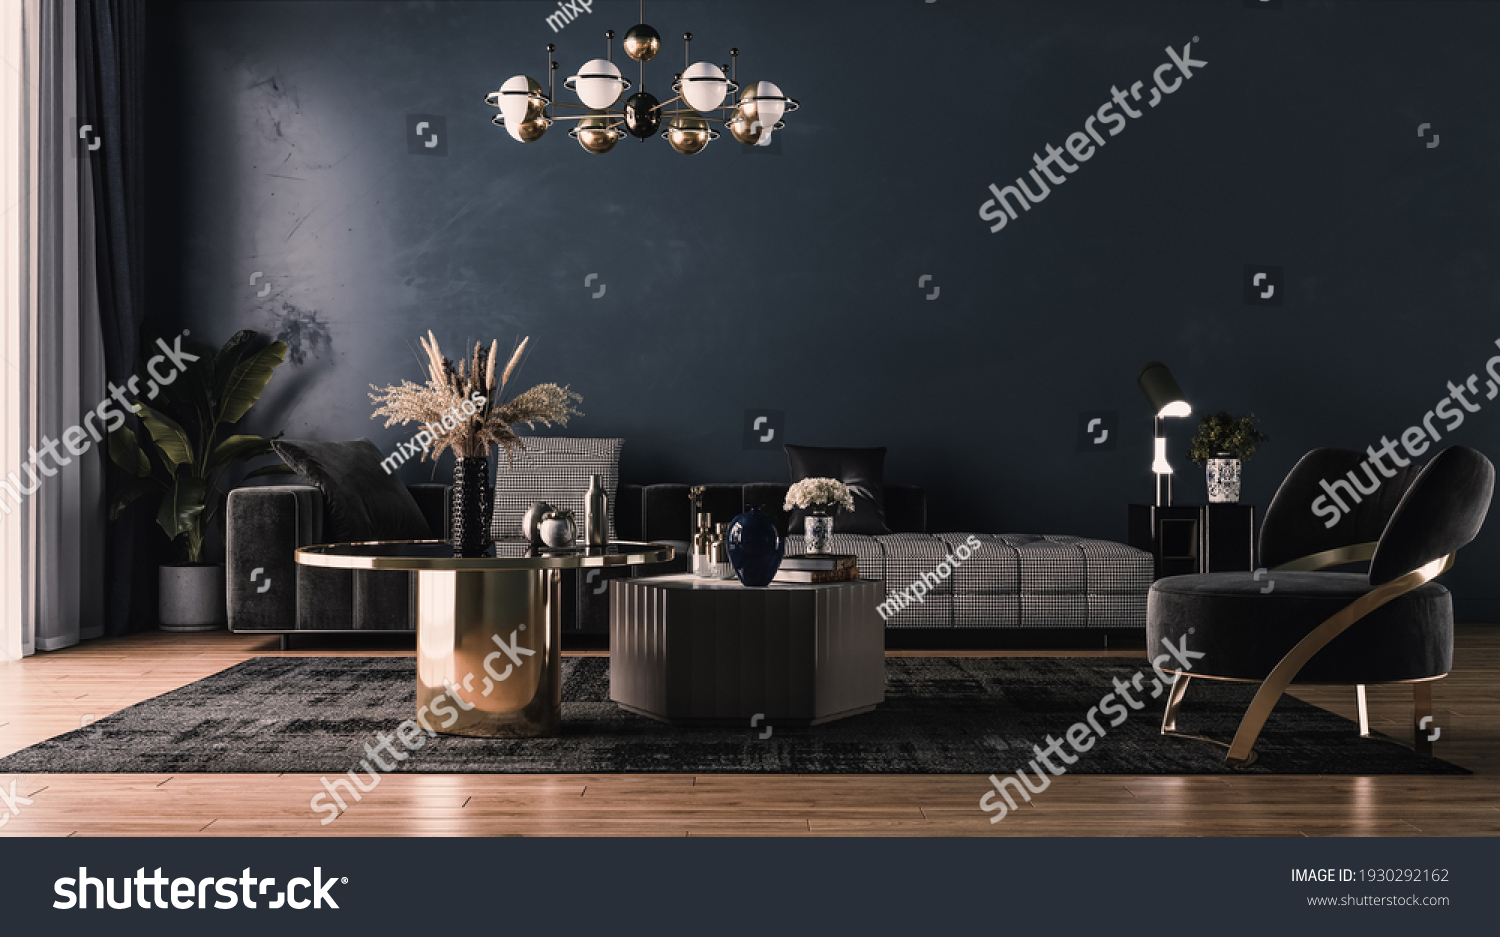 Modern interior design for home, office, interior details, upholstered furniture against the background of a dark classic wall. #1930292162